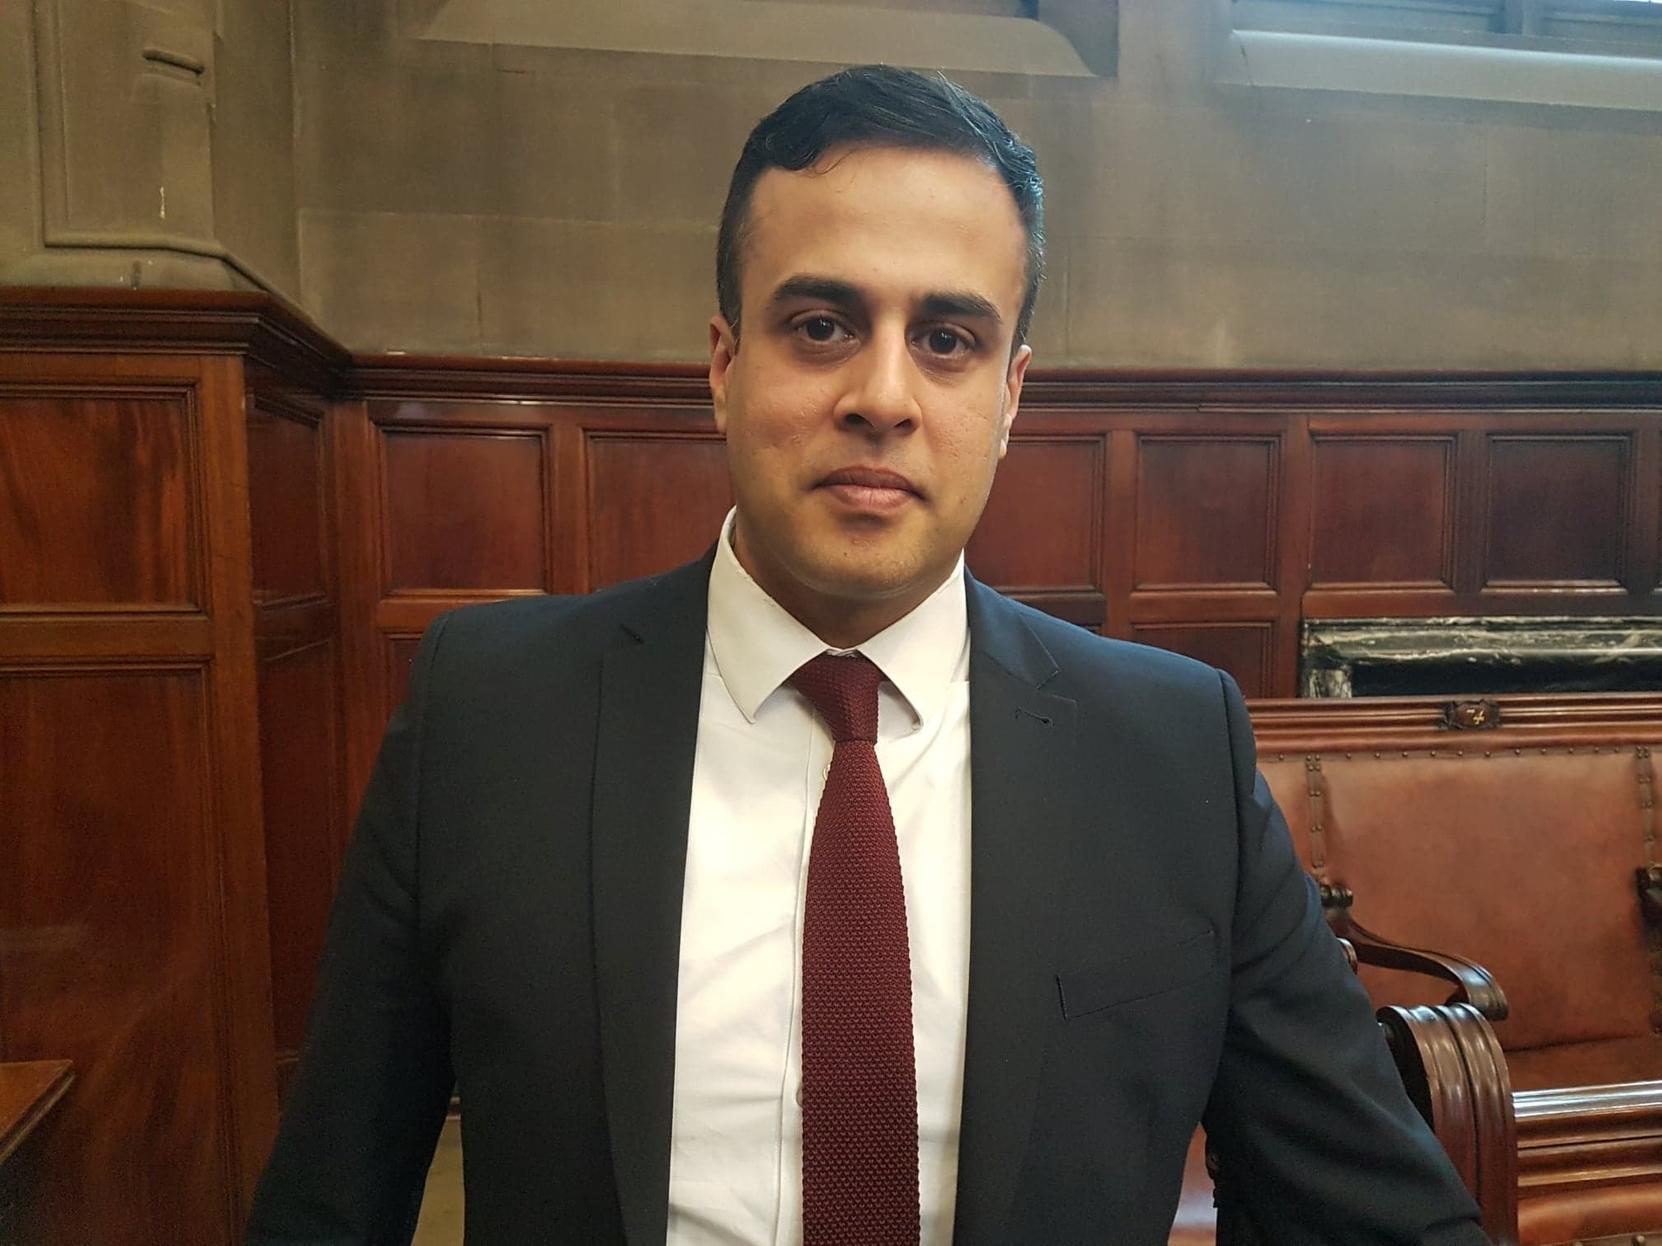 Councillor Nadeem Ahmed said it was important to "call out" MPs over their actions.